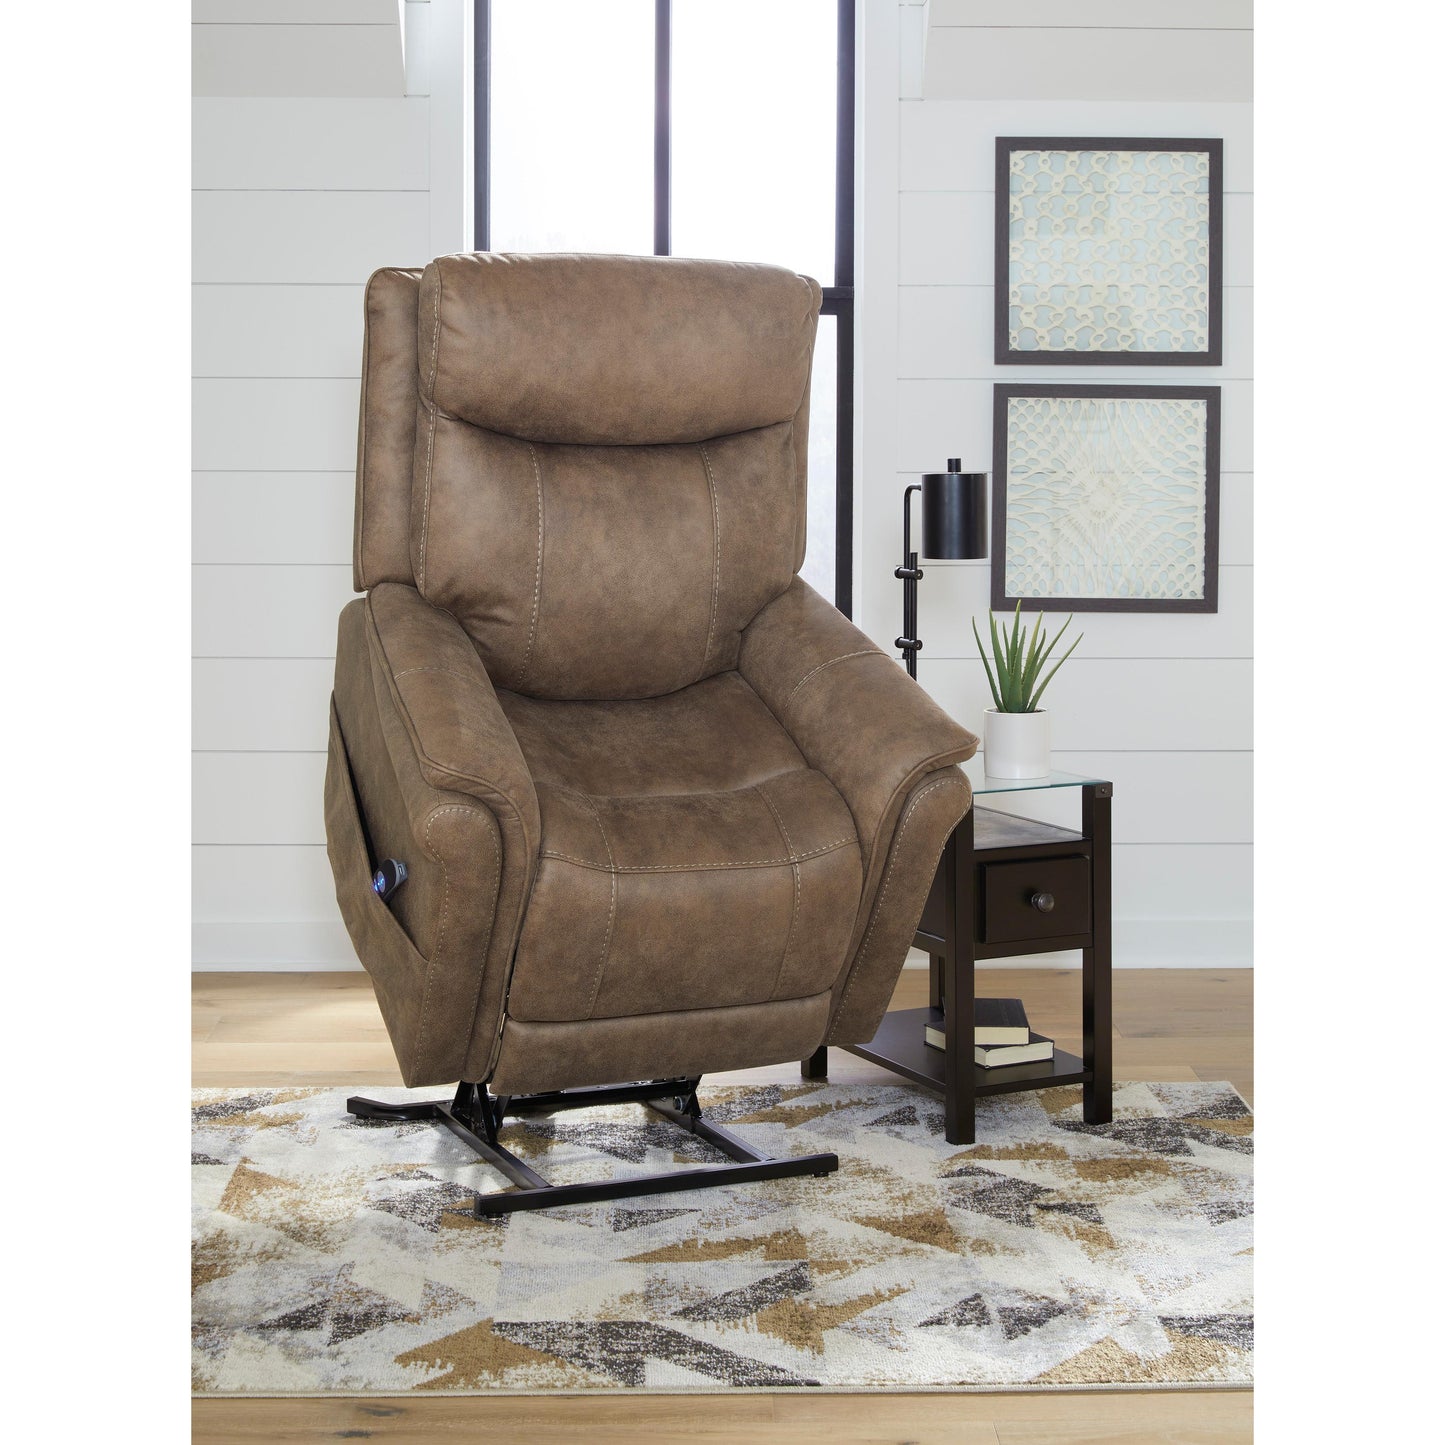 Signature Design by Ashley Lorreze Fabric Lift Chair with Heat and Massage 8530612 IMAGE 10